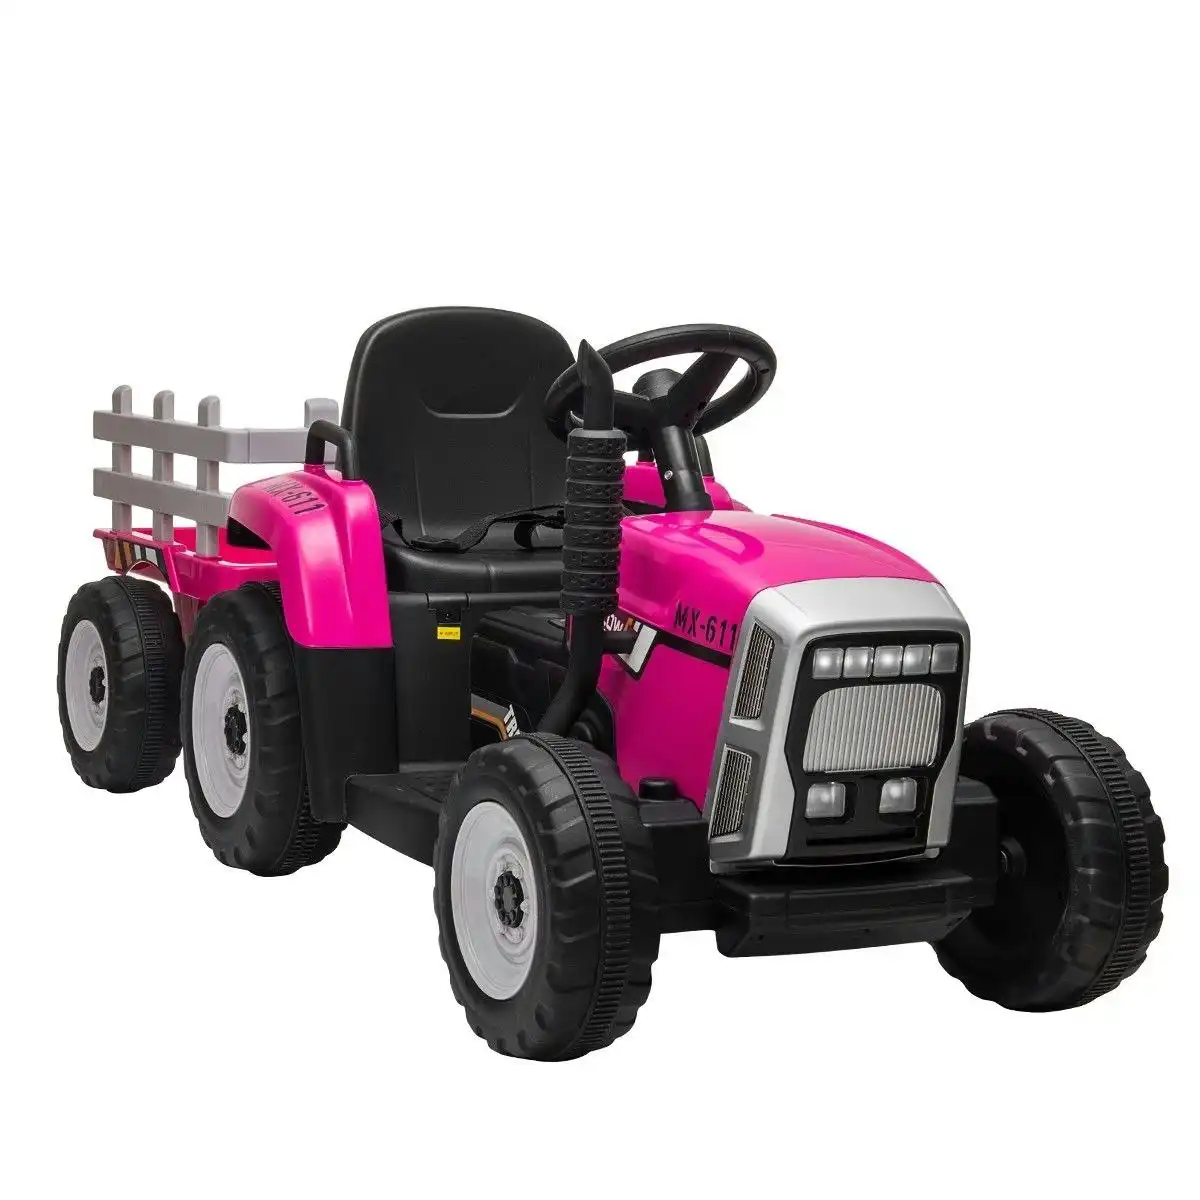 Ausway Kids Farm Tractor Electric Ride On Toys 2.4G R/C Remote Control Cars w/ Trailer Neon Pink